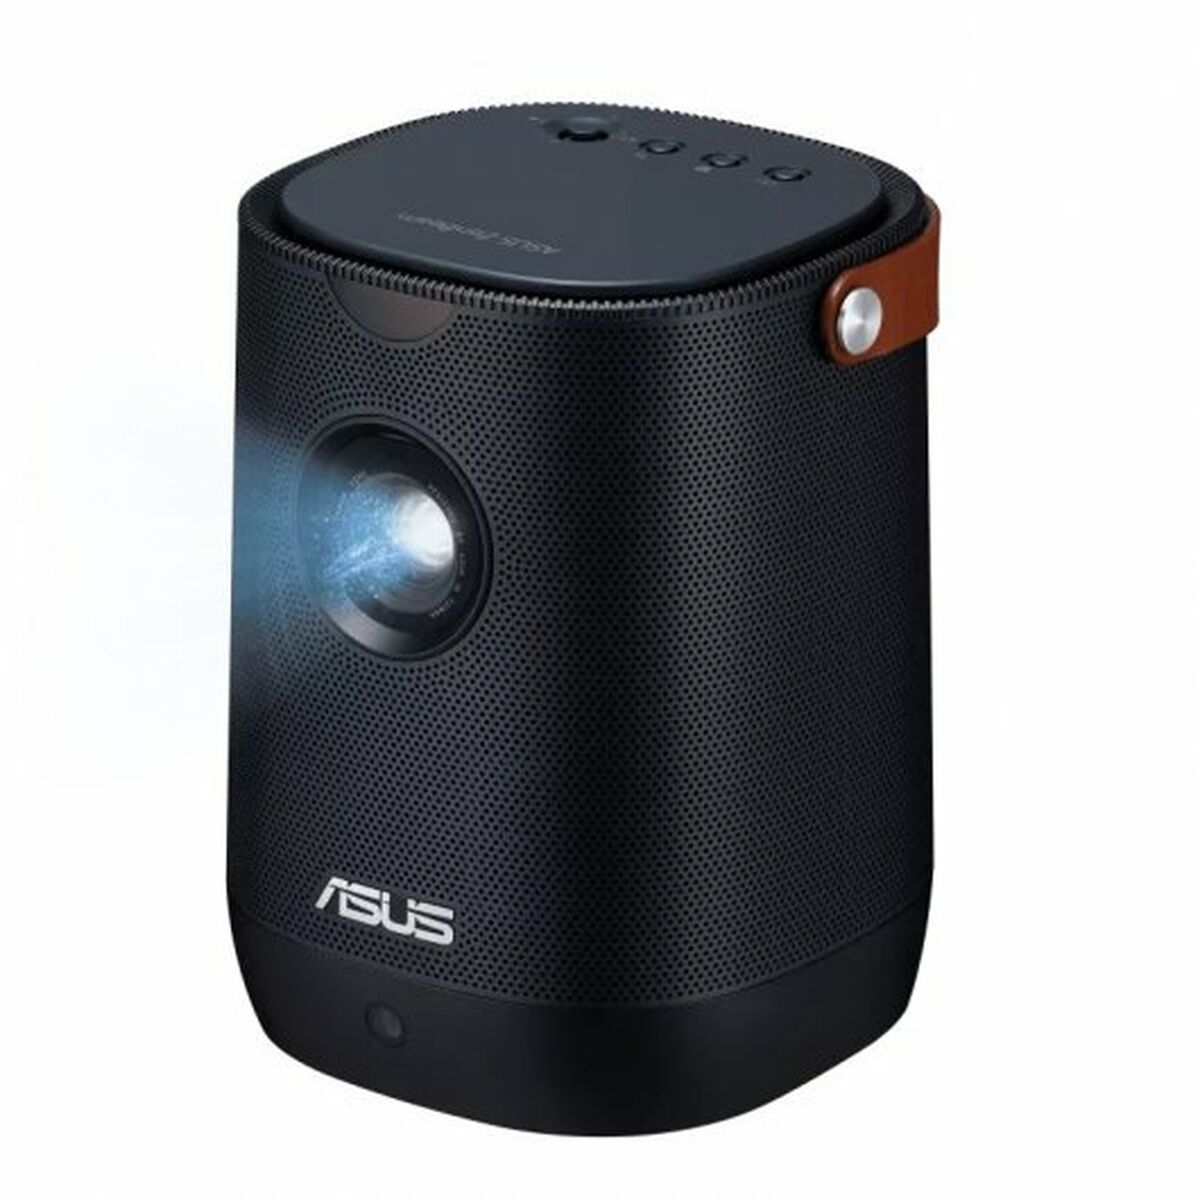 Projector Asus 90LJ00I5-B01070 Full HD 400 lm 1920 x 1080 px, Asus, Electronics, TV, Video and home cinema, projector-asus-90lj00i5-b01070-full-hd-400-lm-1920-x-1080-px, Brand_Asus, category-reference-2609, category-reference-2642, category-reference-2947, category-reference-t-18805, category-reference-t-18811, category-reference-t-19653, cinema and television, computers / peripherals, Condition_NEW, entertainment, office, Price_700 - 800, RiotNook